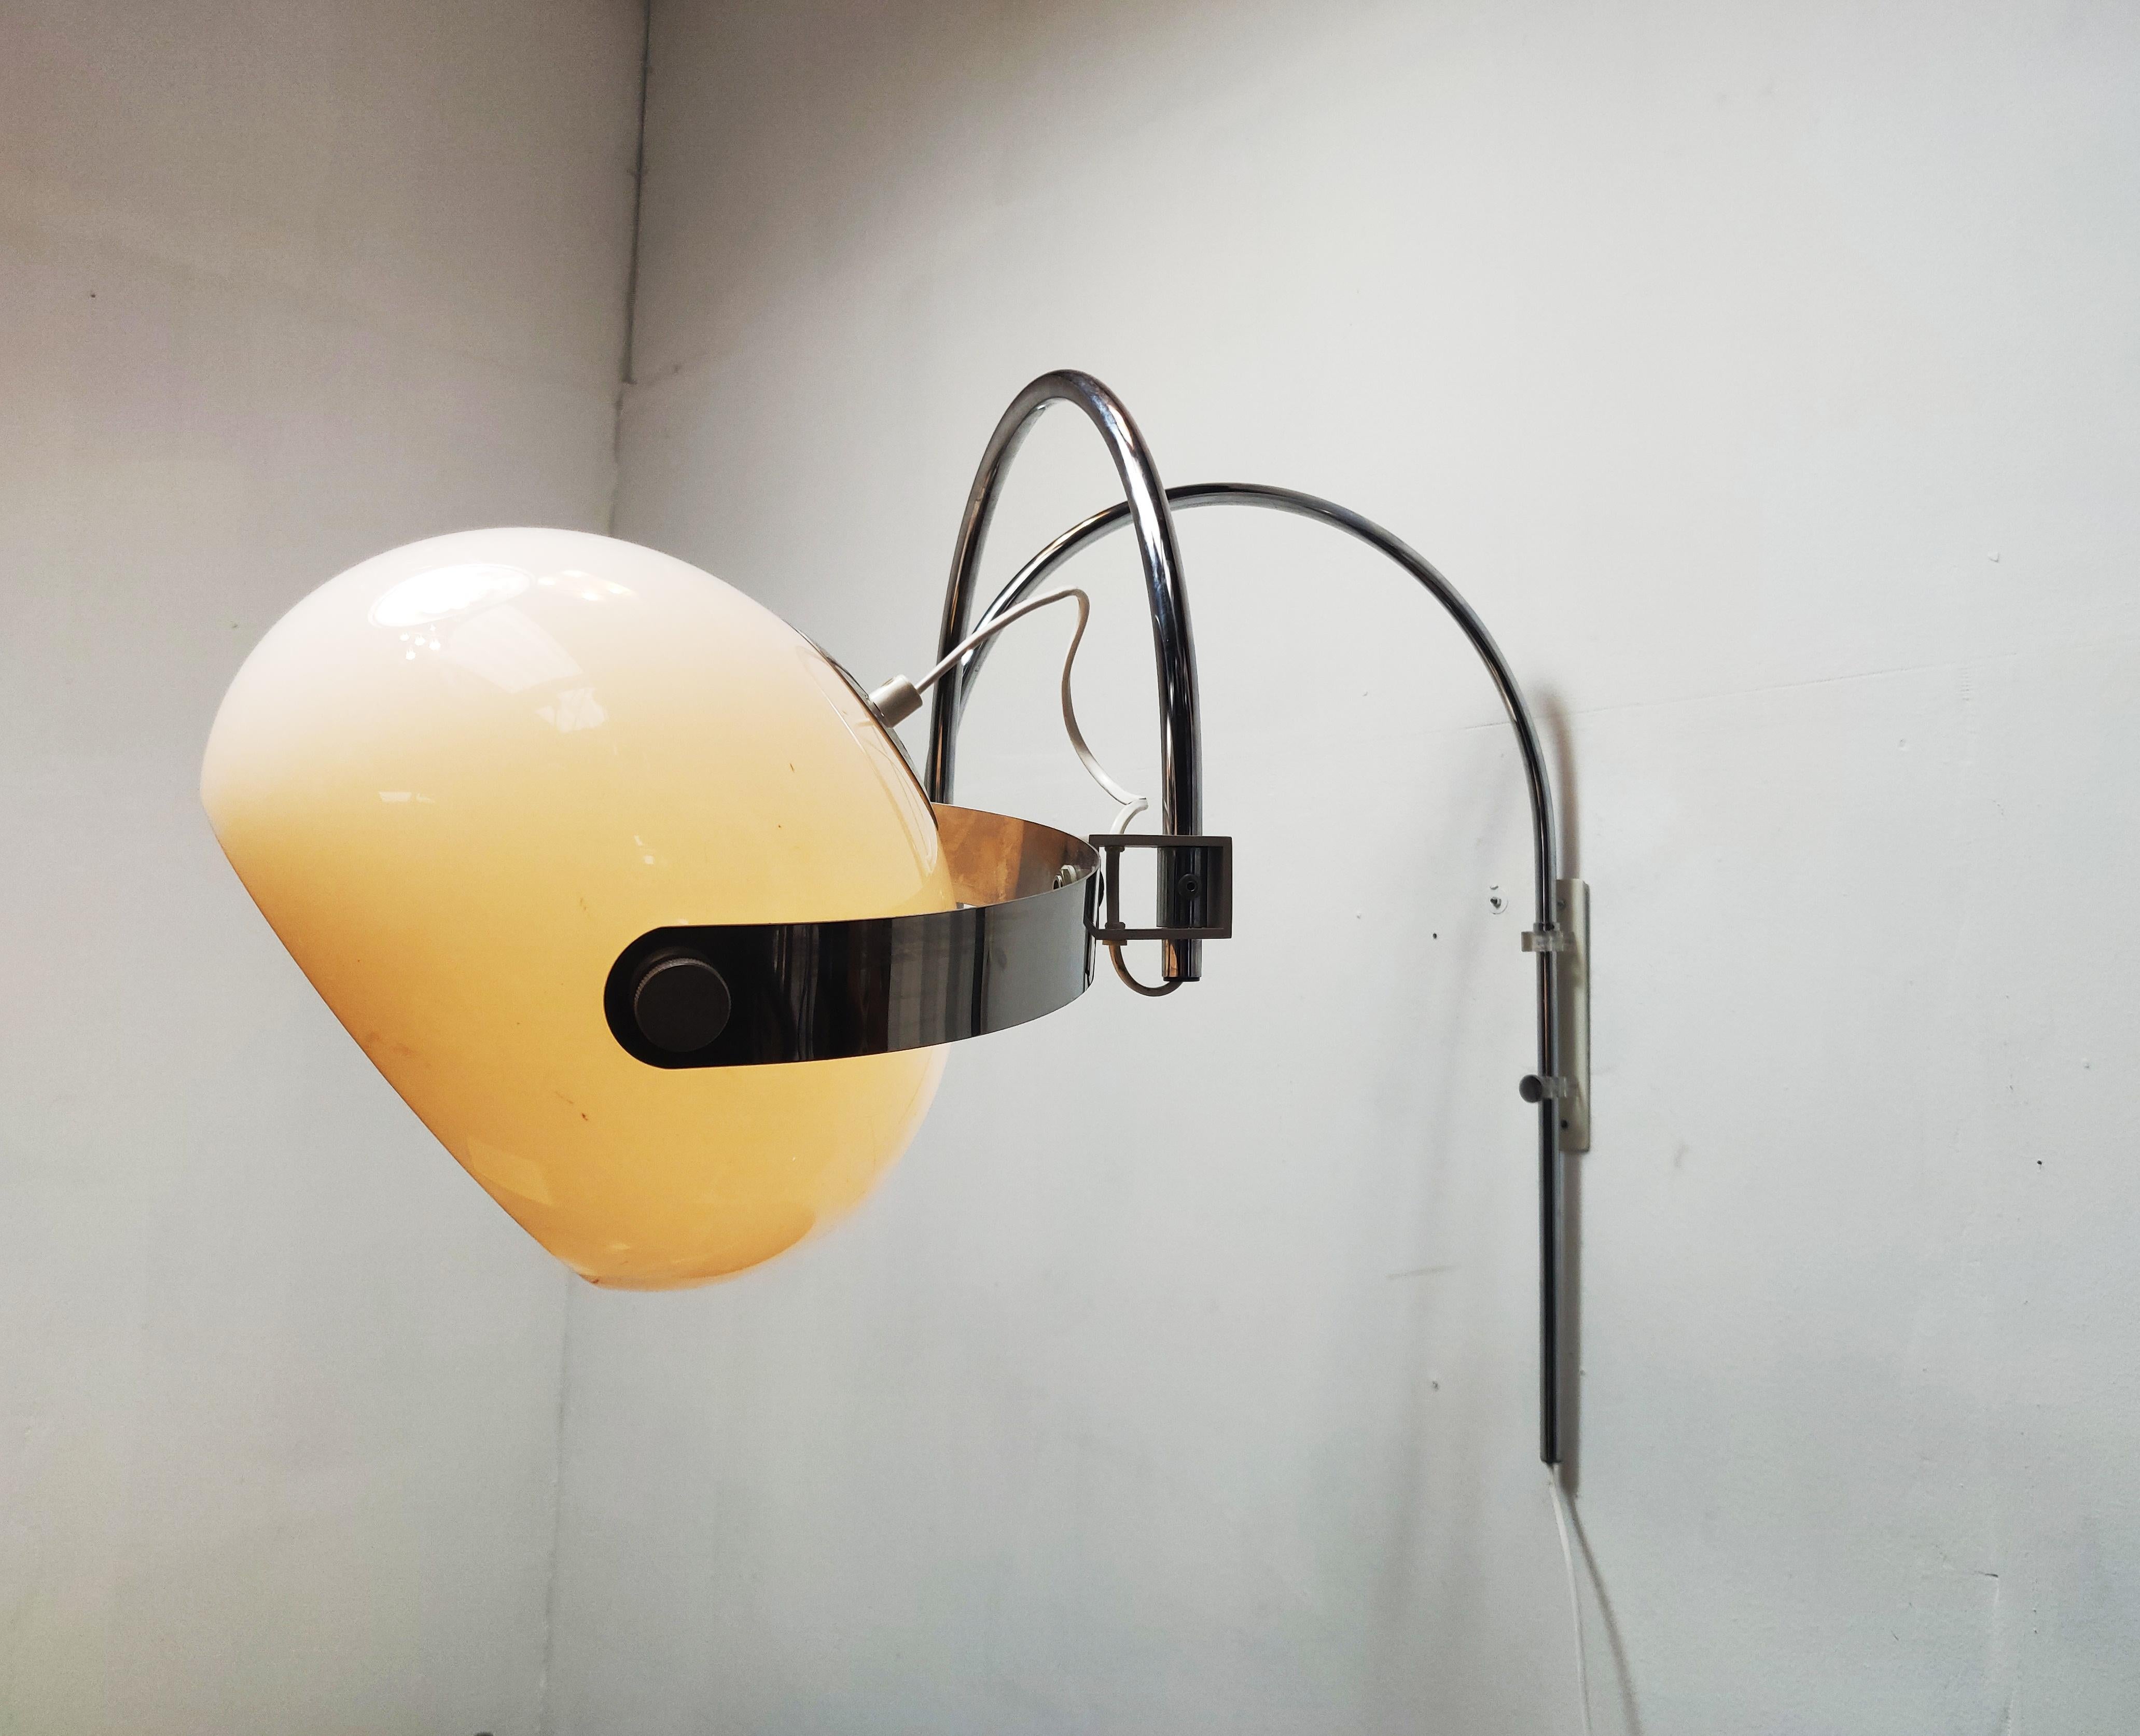 Dutch Design Vintage double arc Space Age wall lamp by Dijkstra Lampen with mushroom acrylic shade, 1970s. The white mushroom shade produces a warm, cosy light. The inner chrome arc can be positioned aligned with or opposed to the main chrome arc,